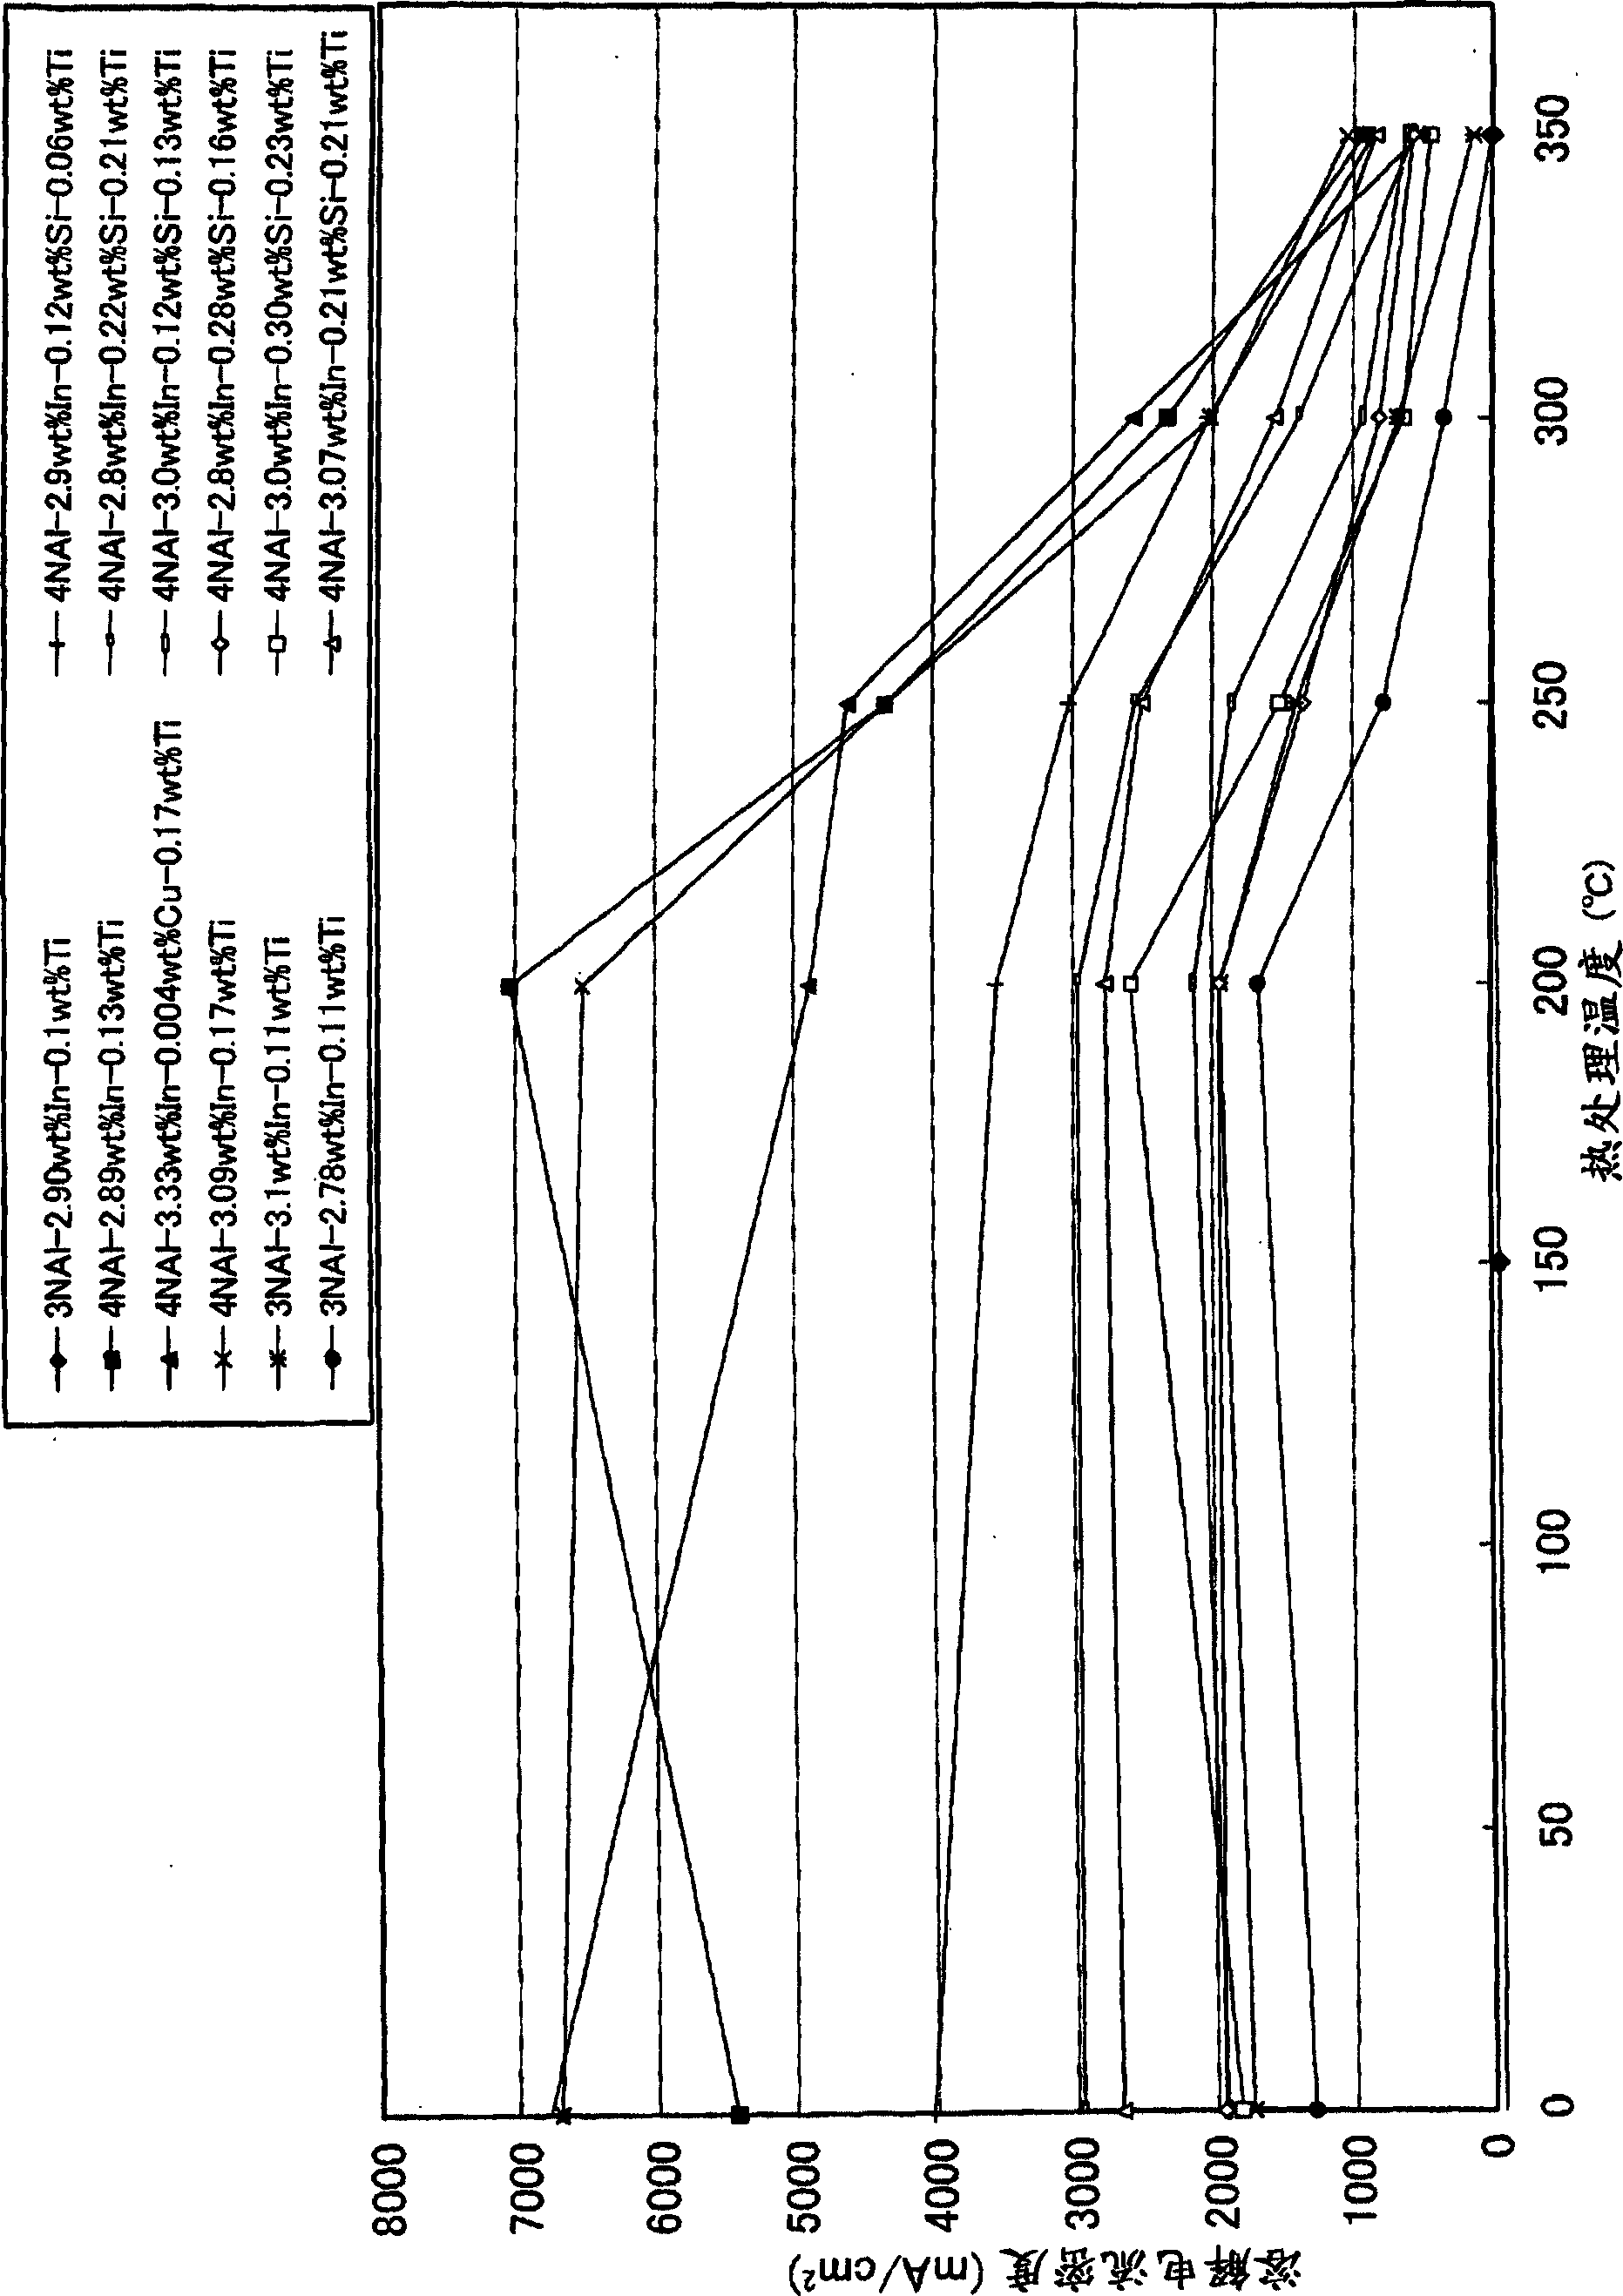 Water-reactive al composite material, water-eactive thermally sprayed al film, process for production of thermally sprayed al film, and structural member for film-&lt;wbr/&gt;forming chamber